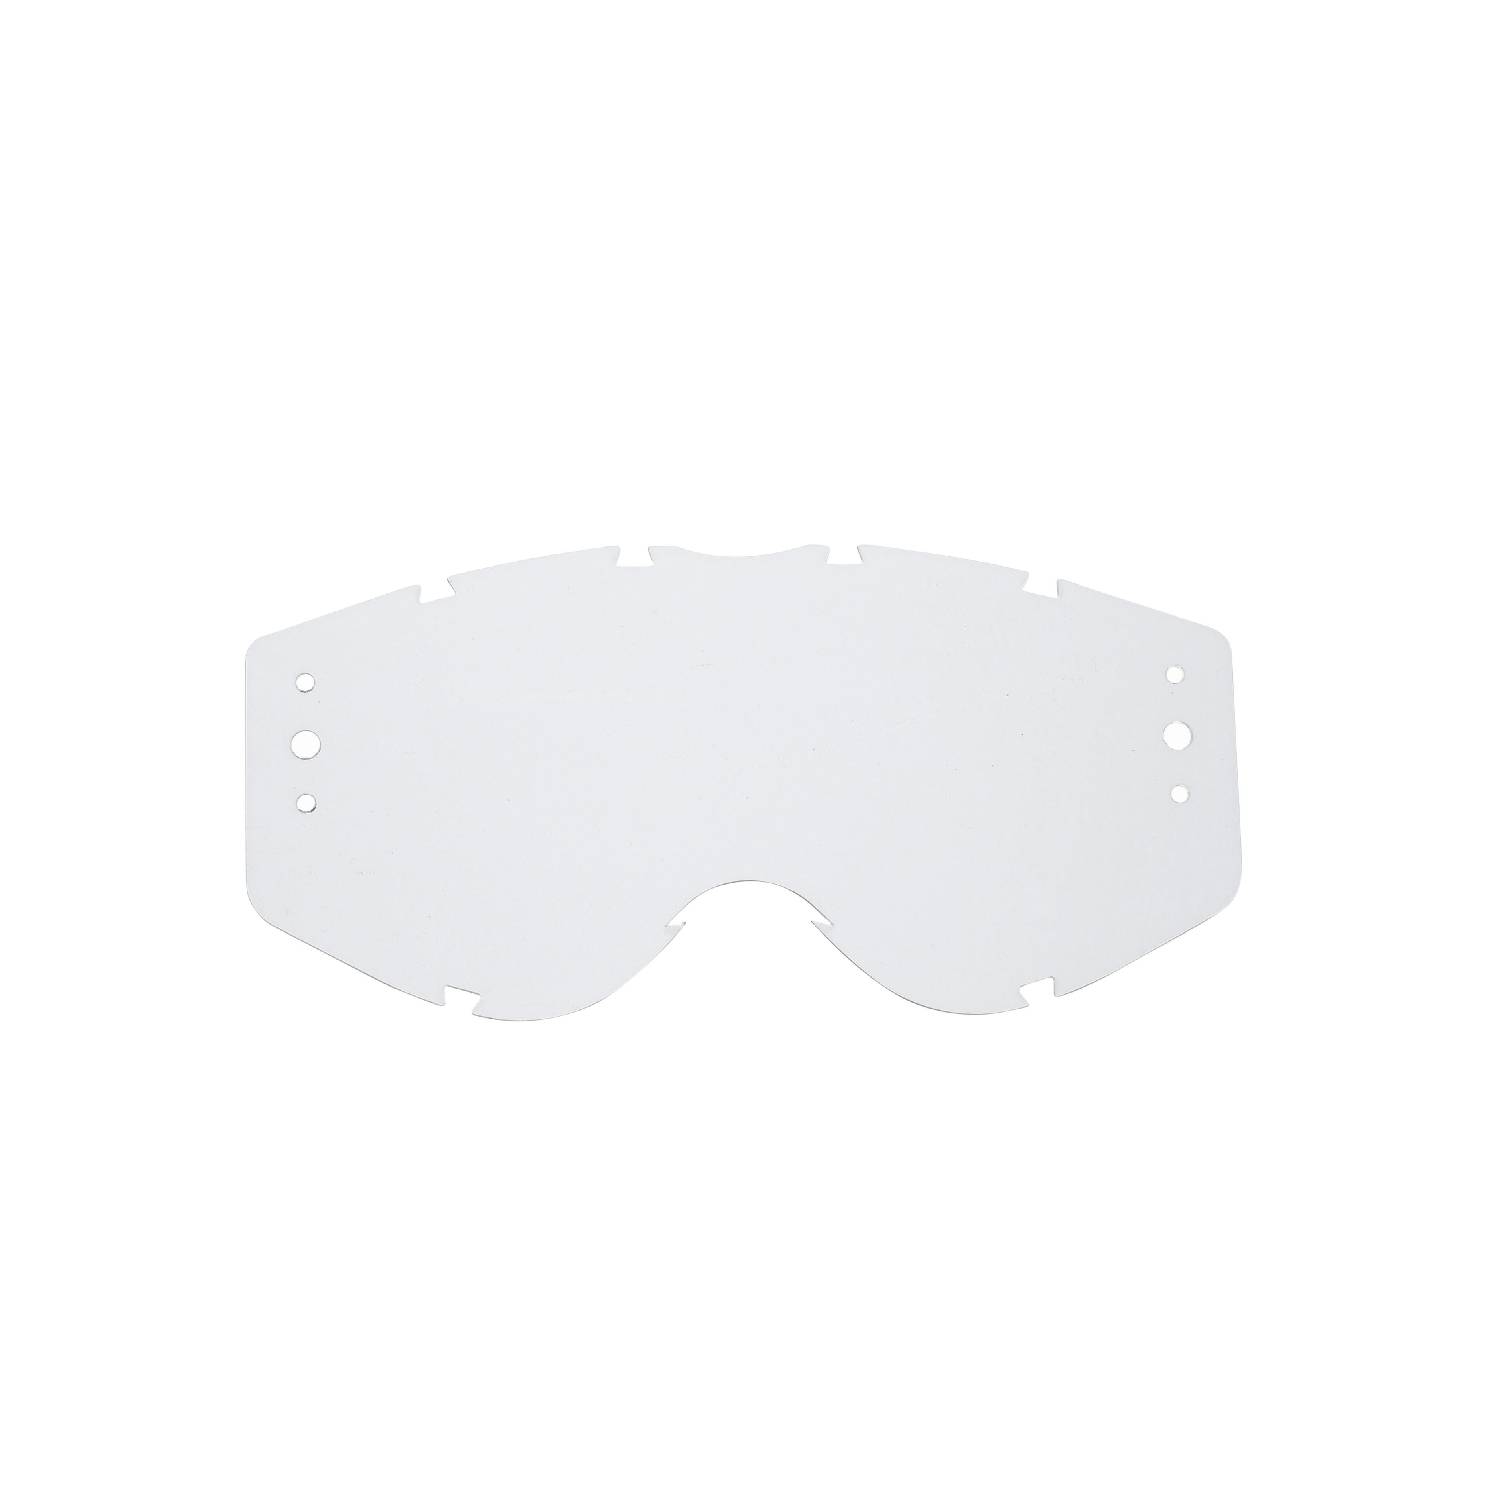 ROLL-OFF lenses with clear lenses compatible for Progrip 3303 Vista goggle